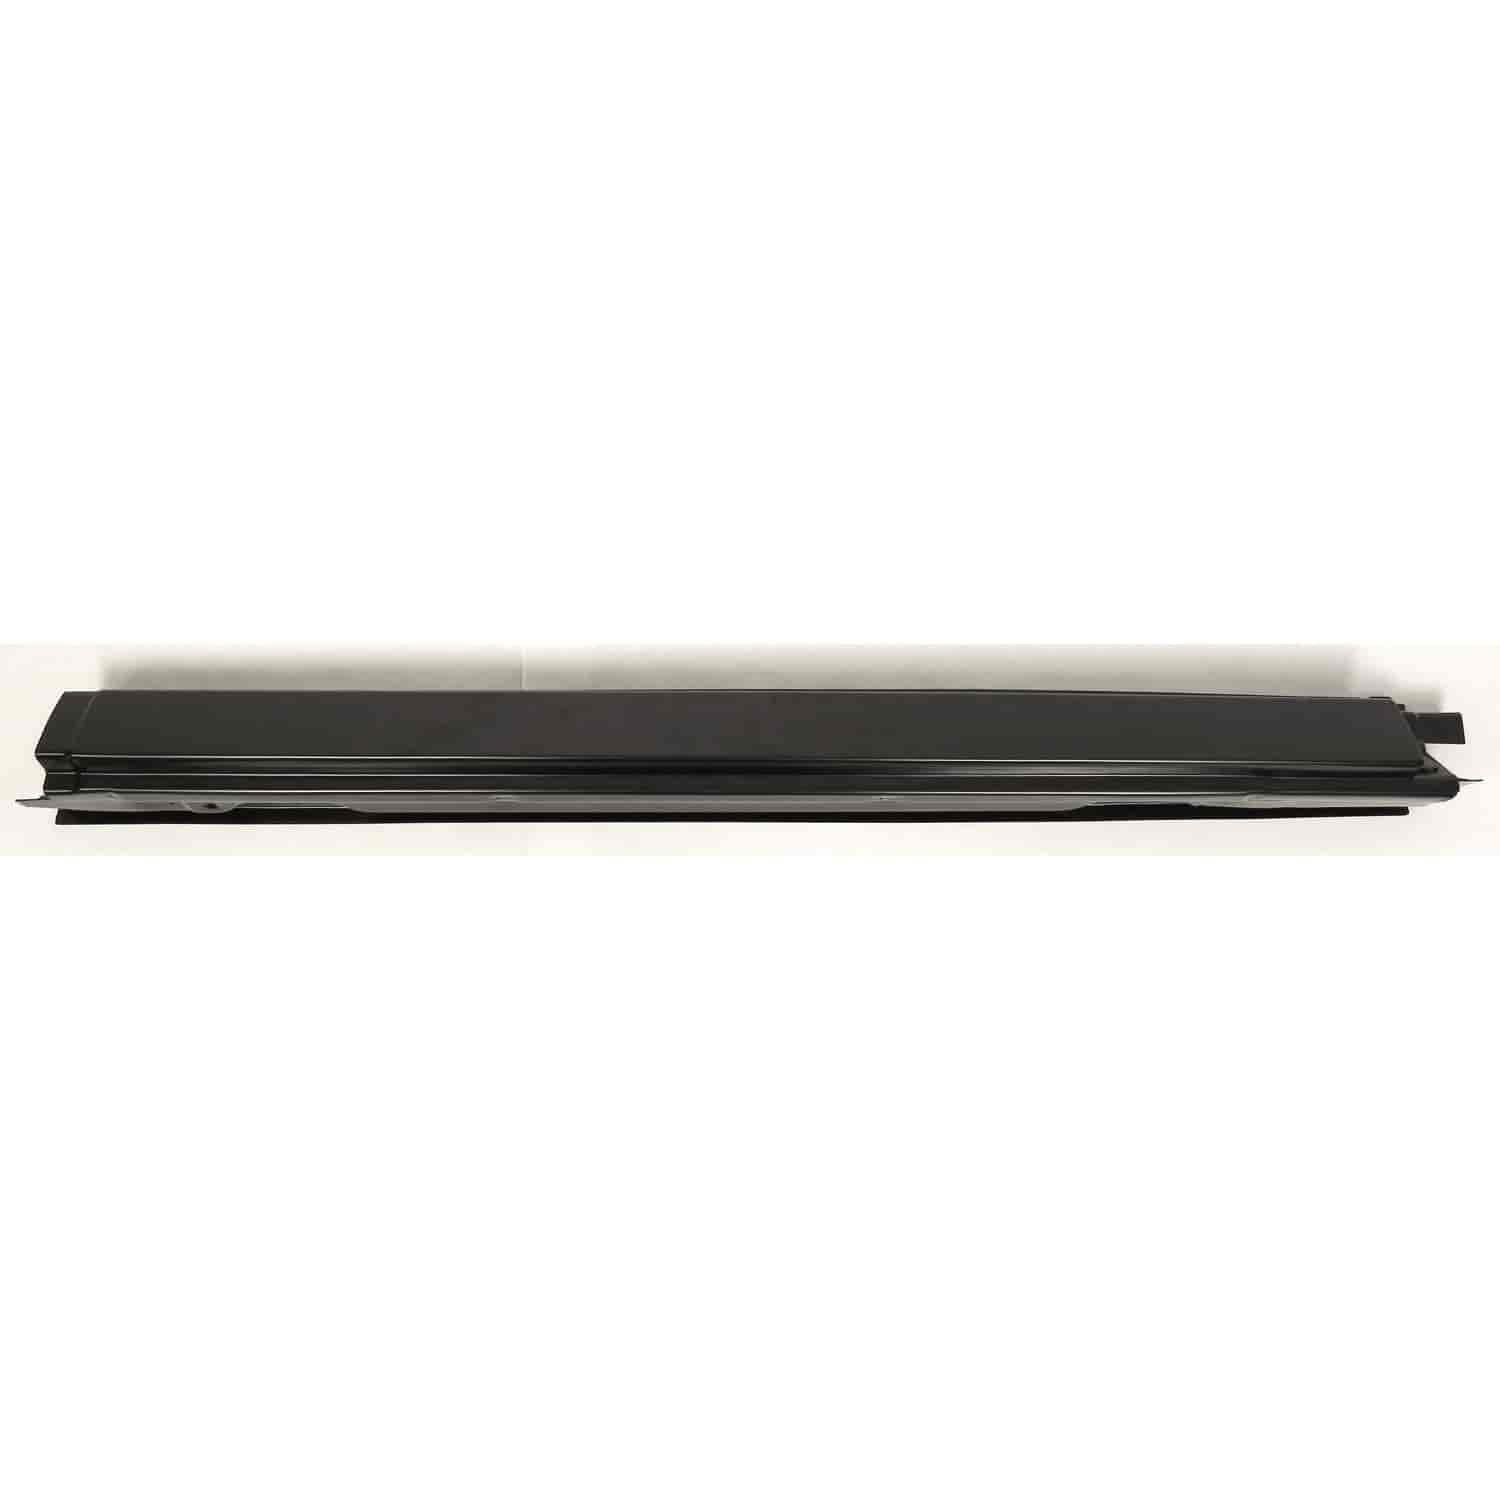 Outer Rocker Panel for 1956 Chevy 150/210/Bel Air